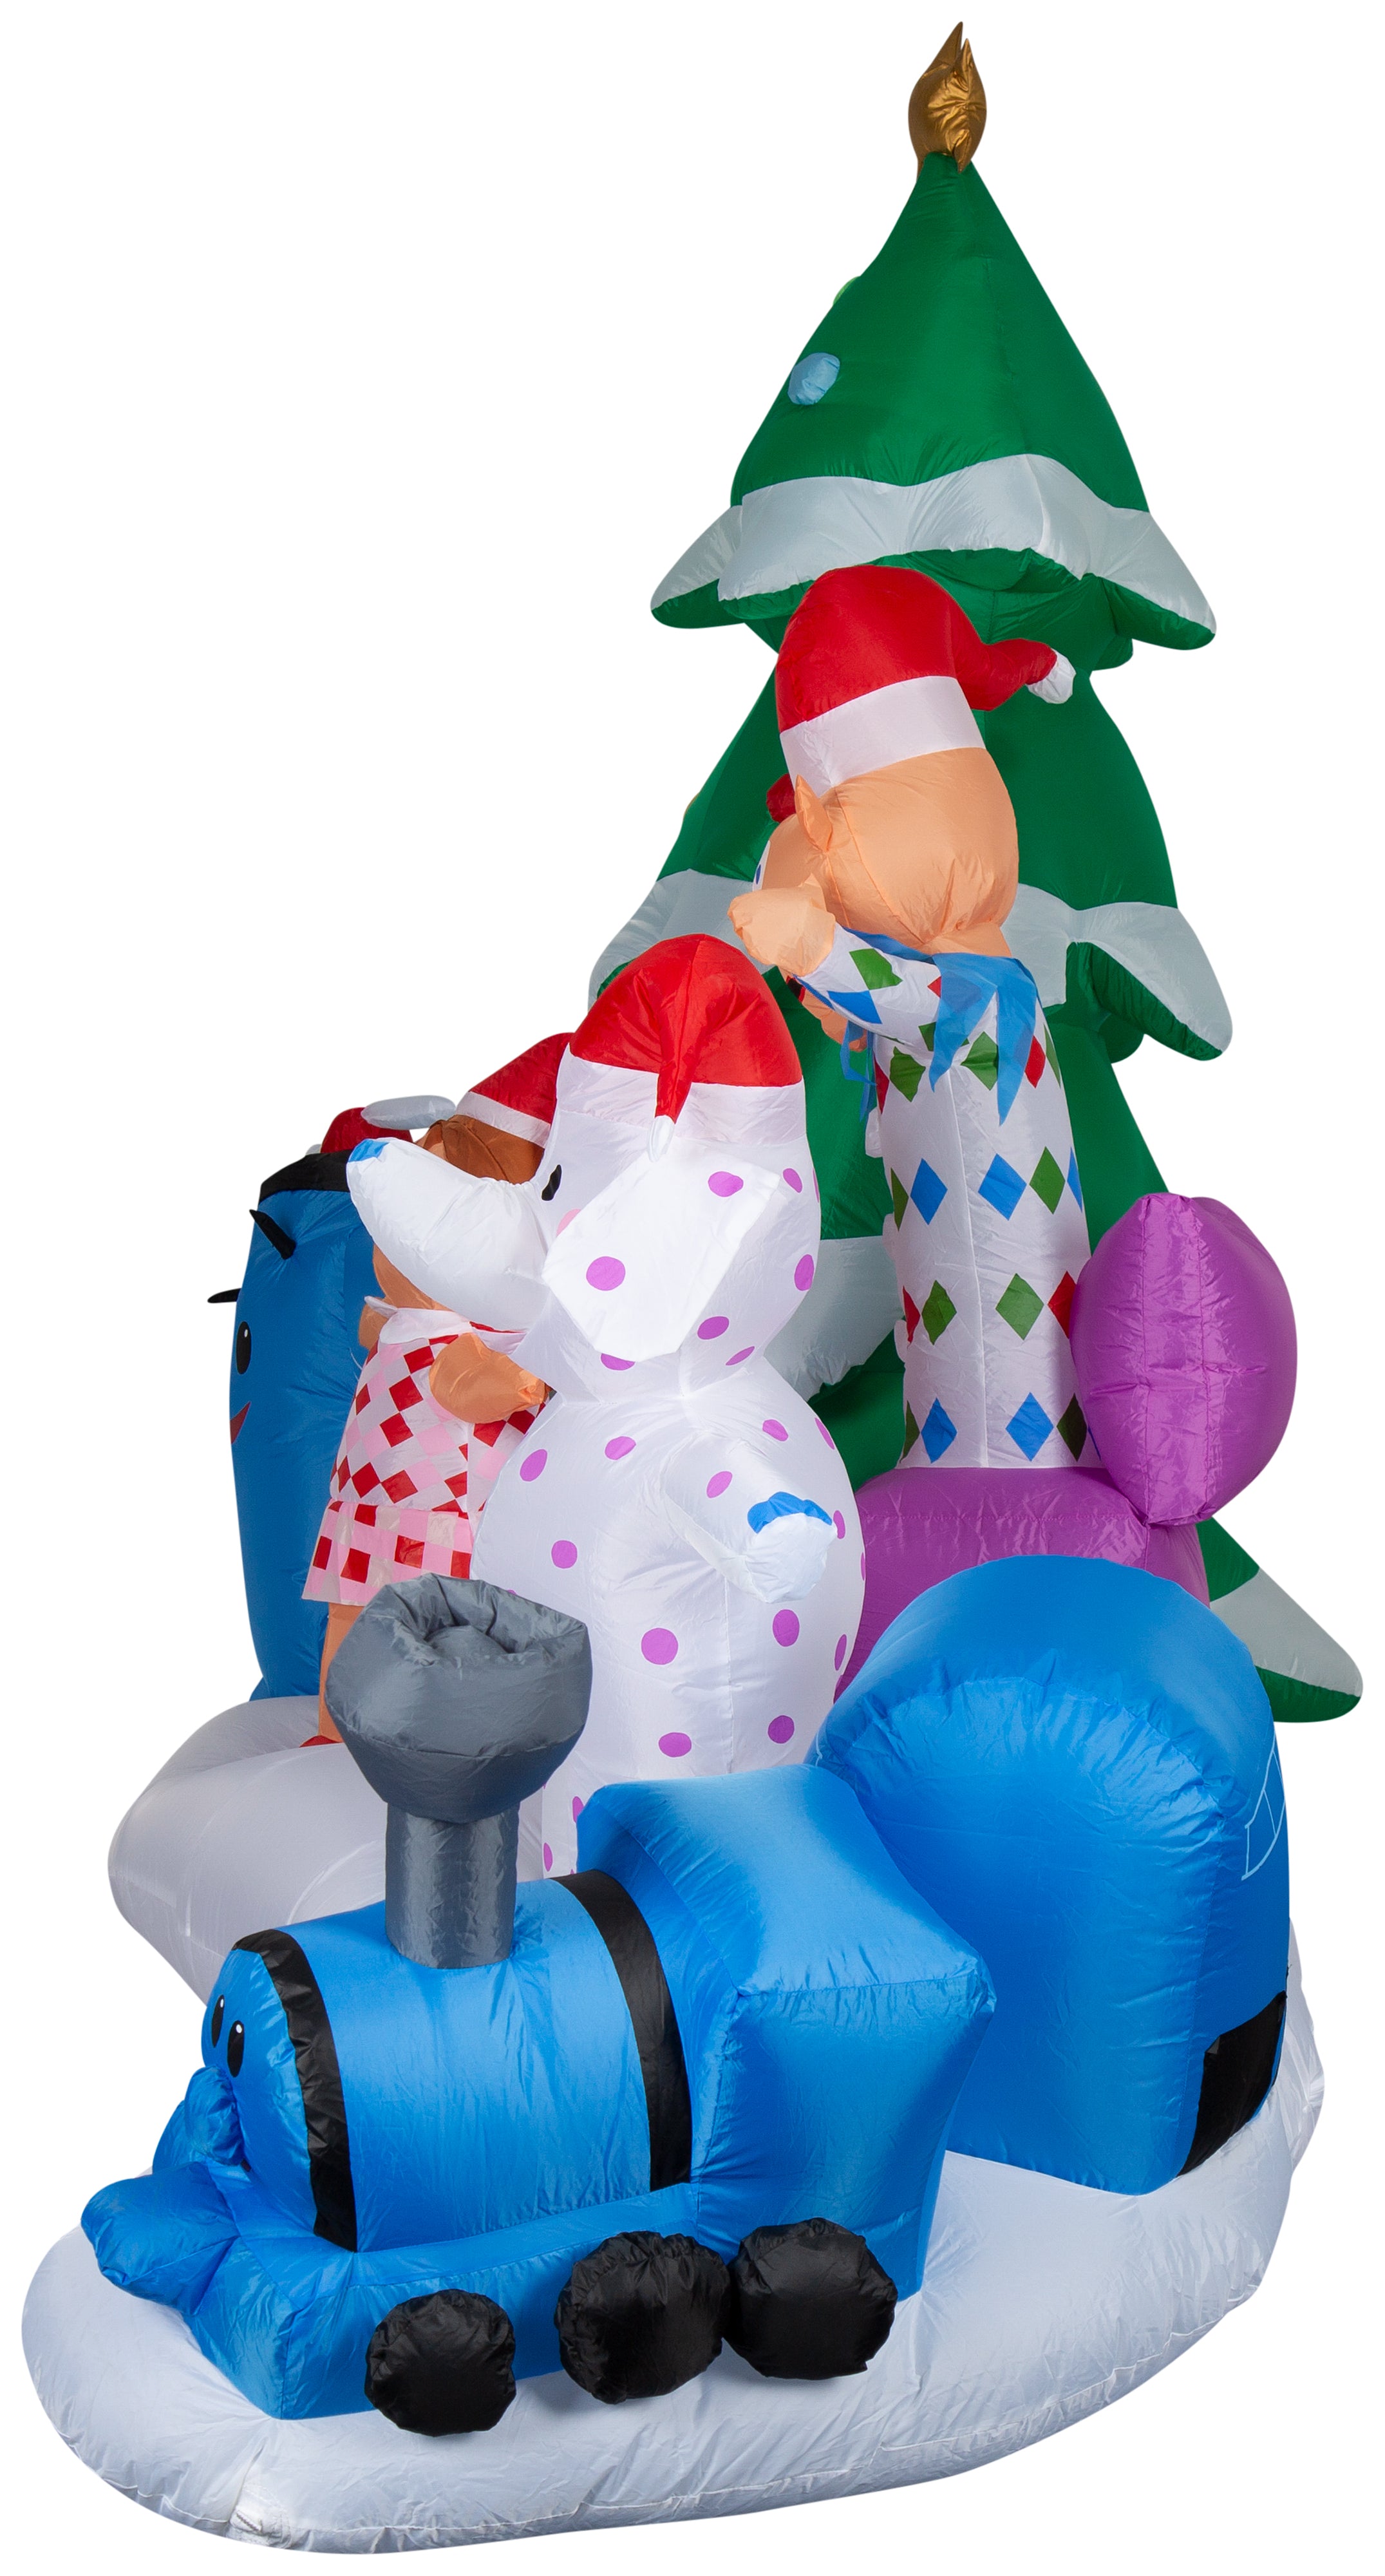 Gemmy Christmas Airblown Inflatable Misfit Toys Scene Rudolph , 7 ft Tall, Multi